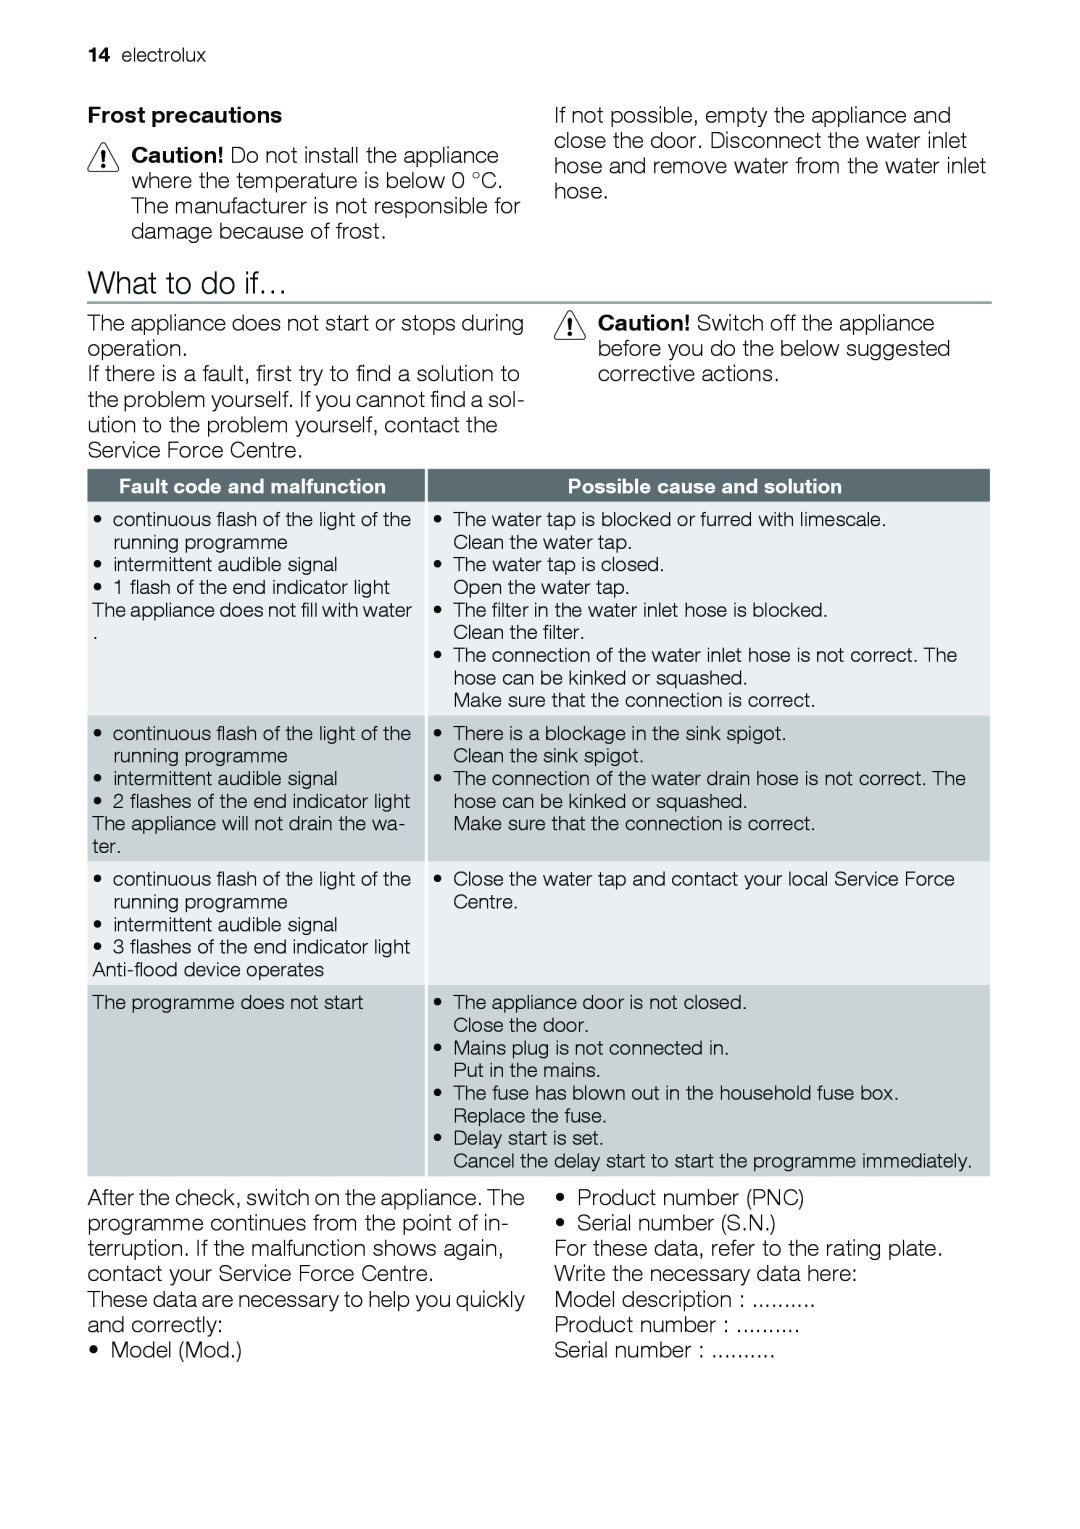 Epson ESL63010 user manual What to do if…, Frost precautions 